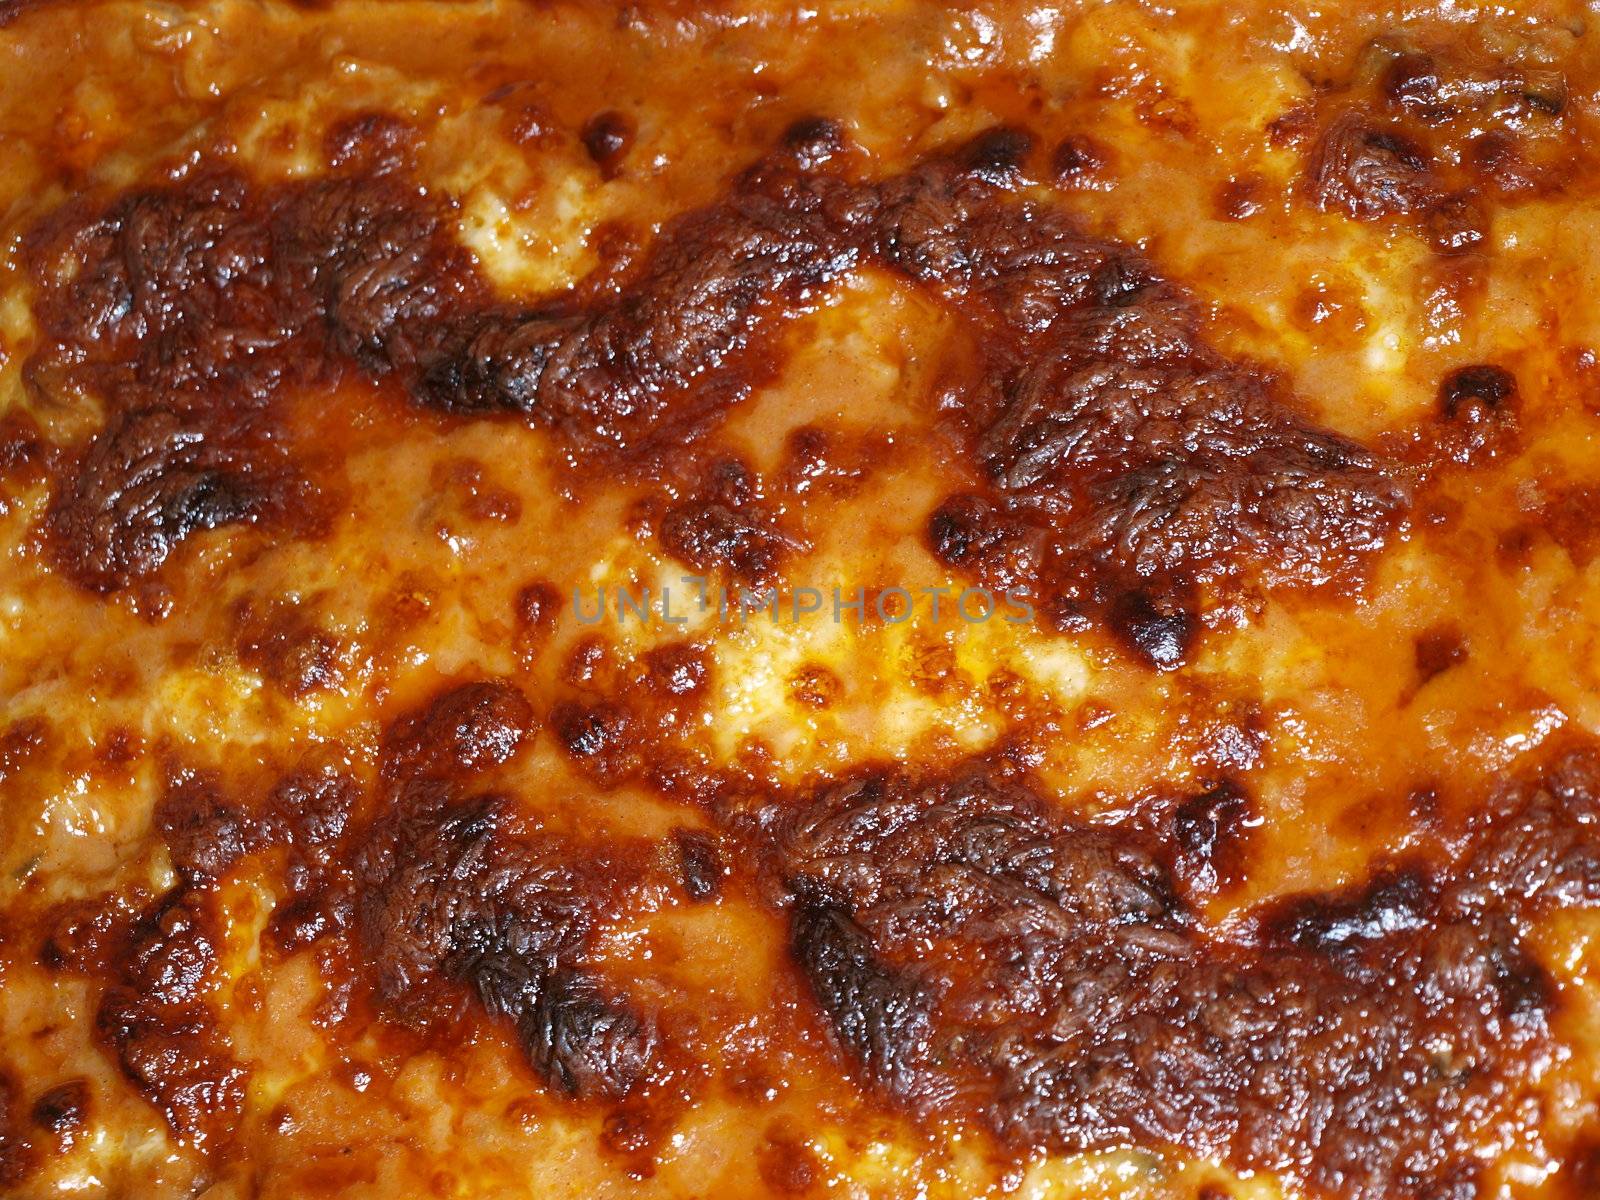 Closeup of melted cheese, brown and crusty